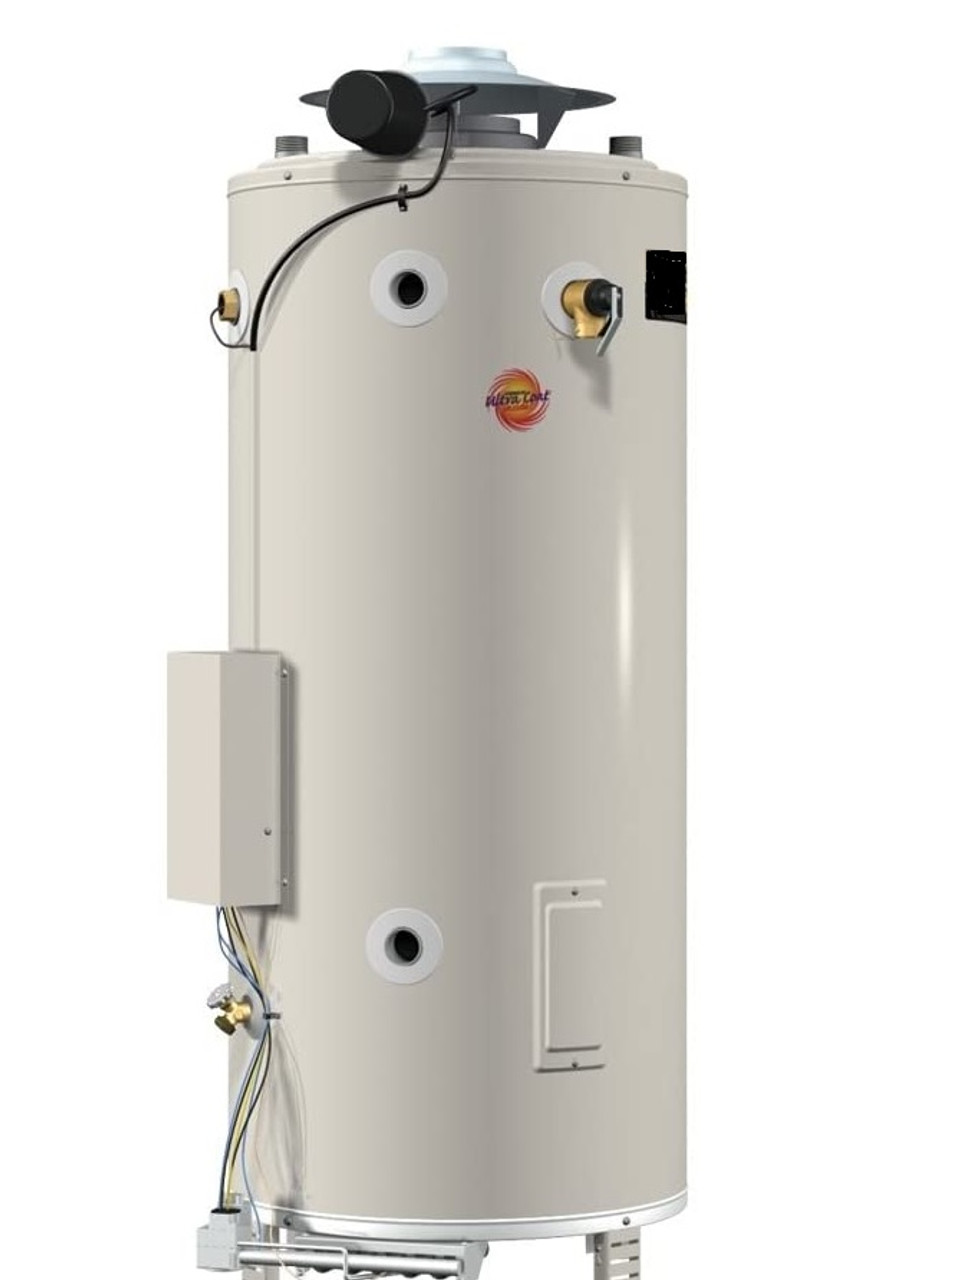 Kwestie Perth Blackborough afschaffen A. O. Smith BTR-250 Water Heater - 100 Gallon Commercial Gas 250,000 BTU -  Commercial Water Heater Sales - ePlumbing Products Inc